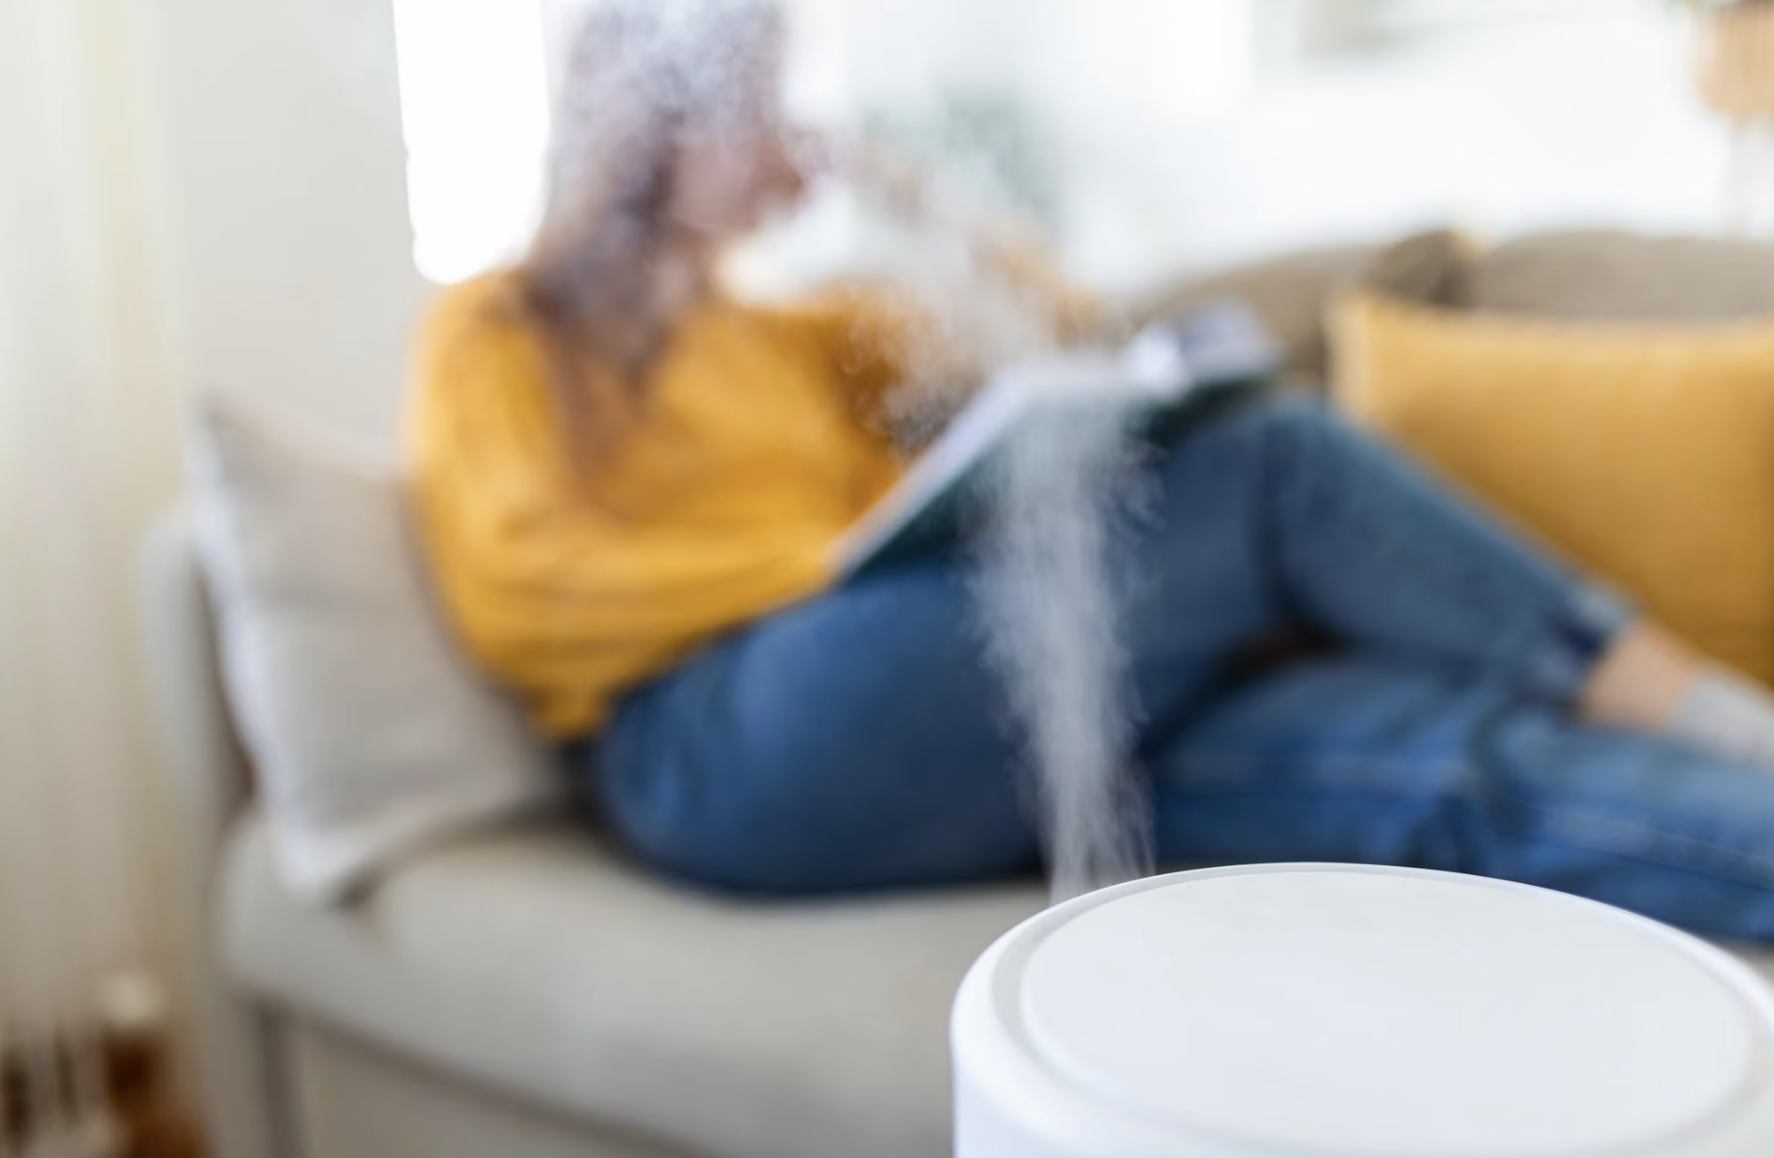 A woman sits on the couch next to a humidifier.